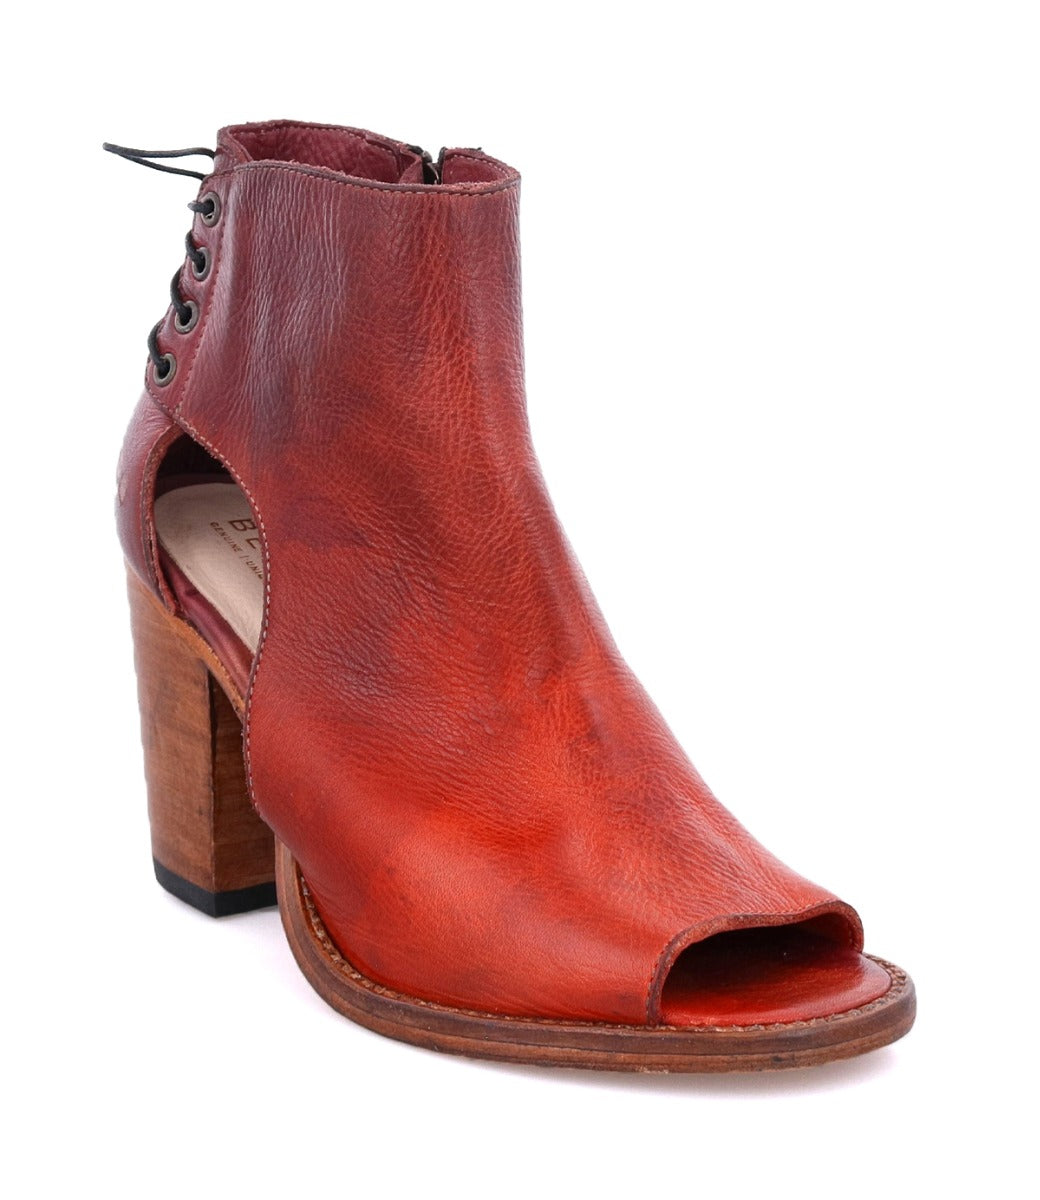 An Angelique women's red leather ankle boot with a wooden heel from Bed Stu.